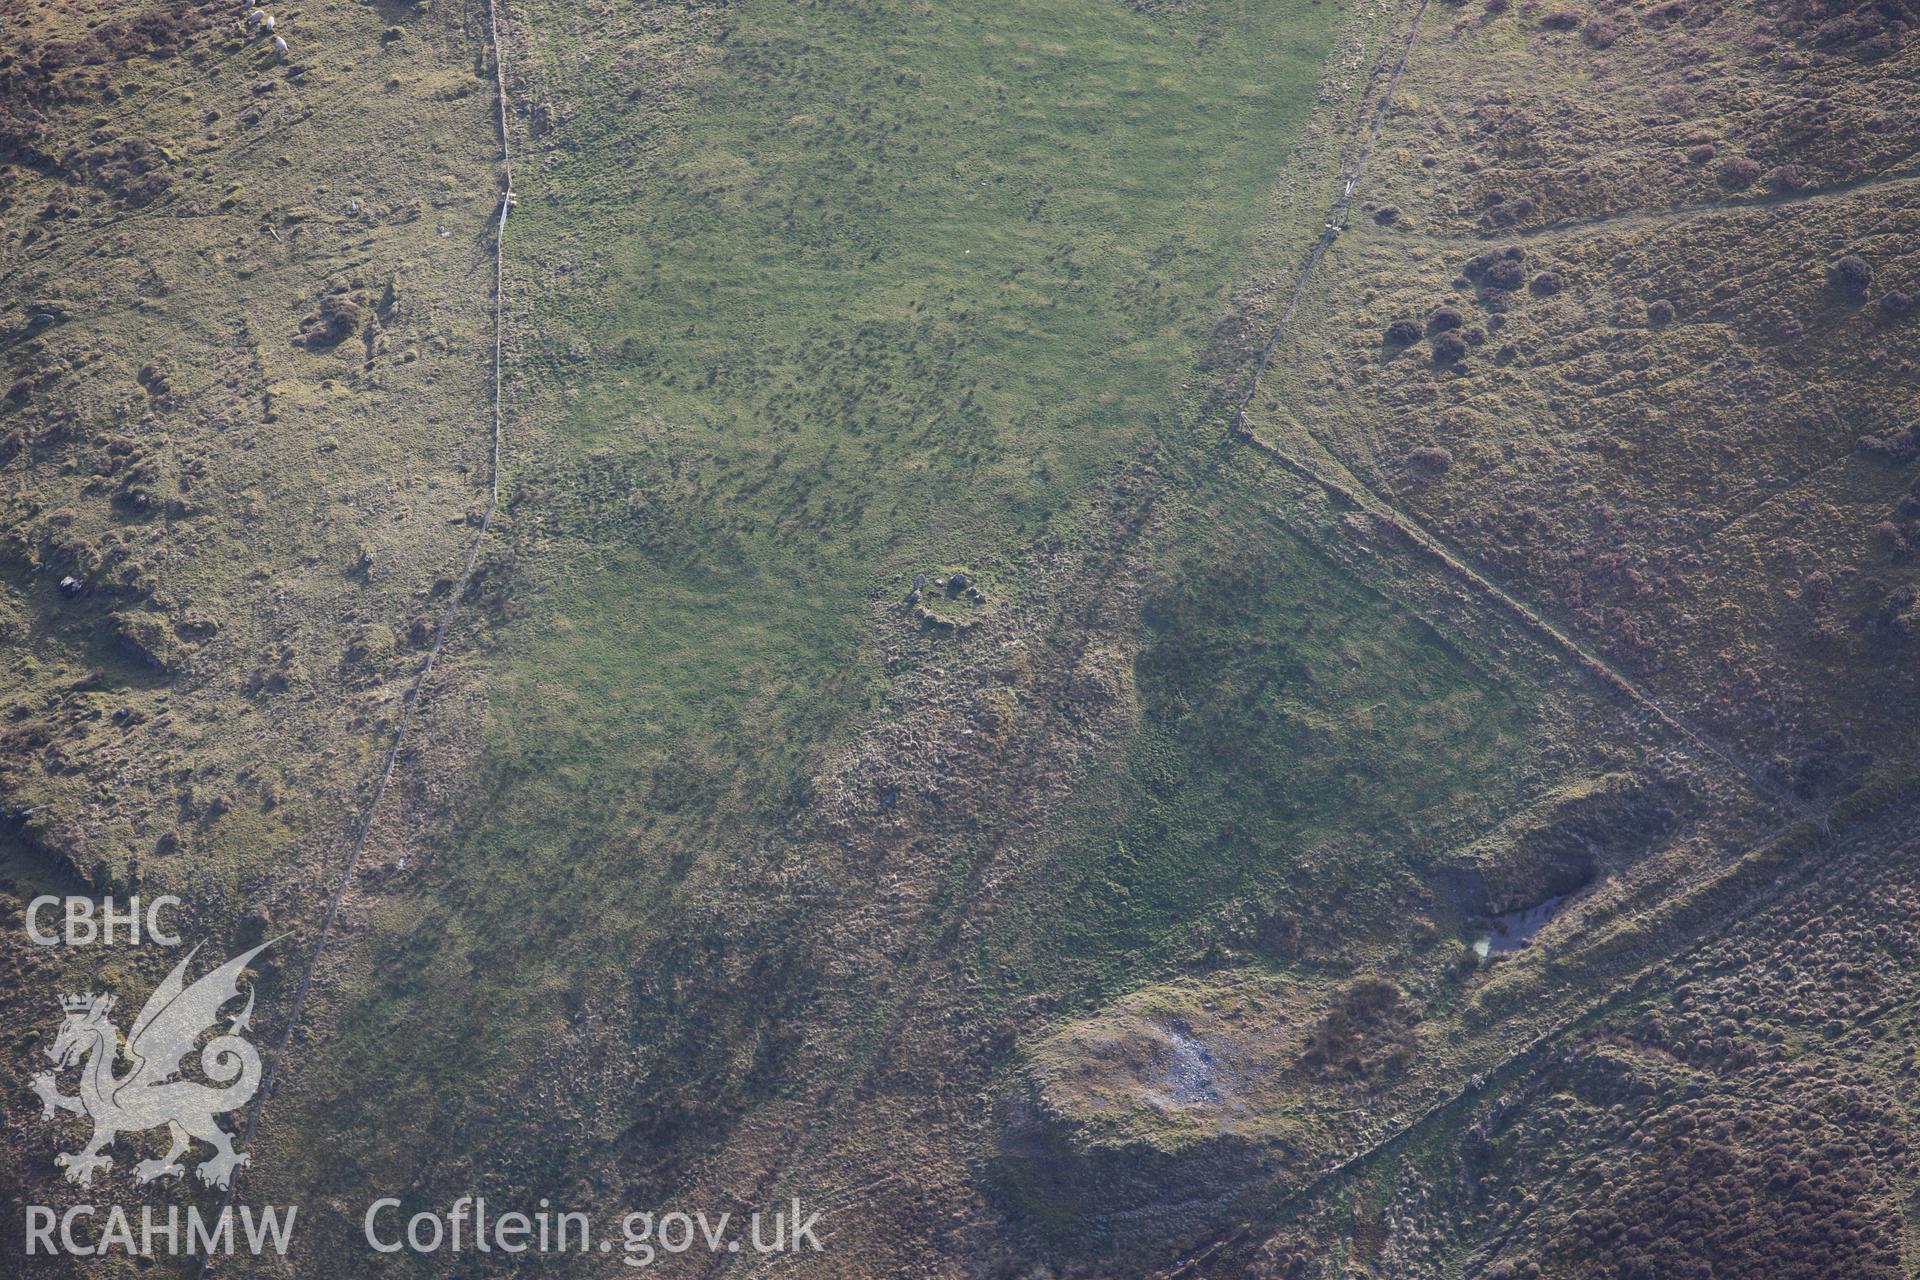 RCAHMW colour oblique photograph of Dolgamfa Cairn. Taken by Toby Driver on 07/02/2012.